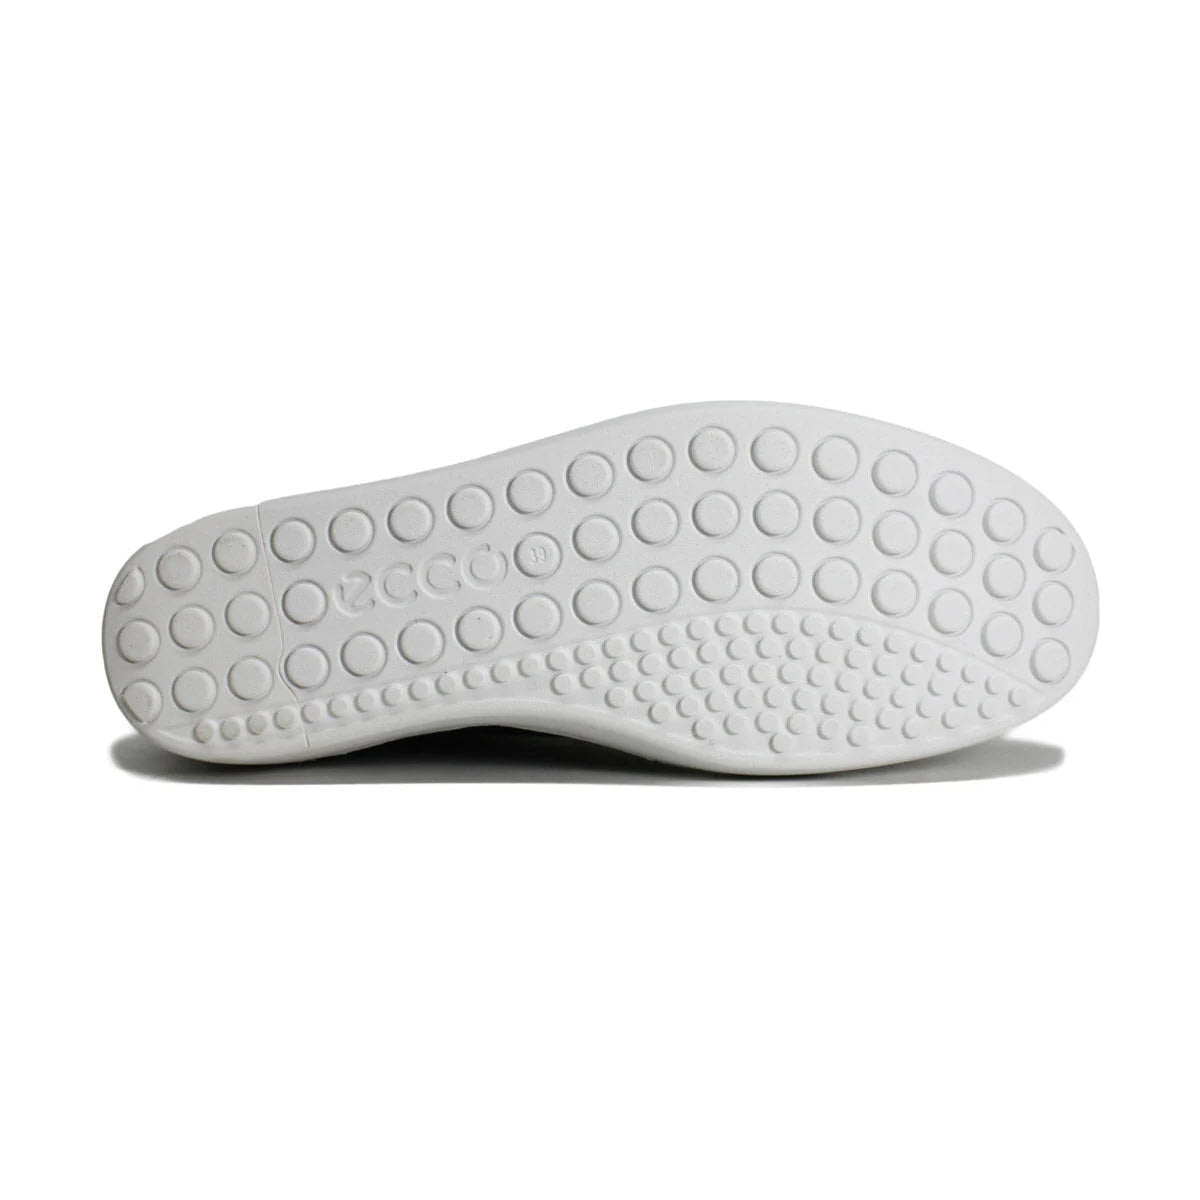 White ECCO Soft 60 sneaker sole with circular tread patterns and a padded footbed, isolated on a white background.